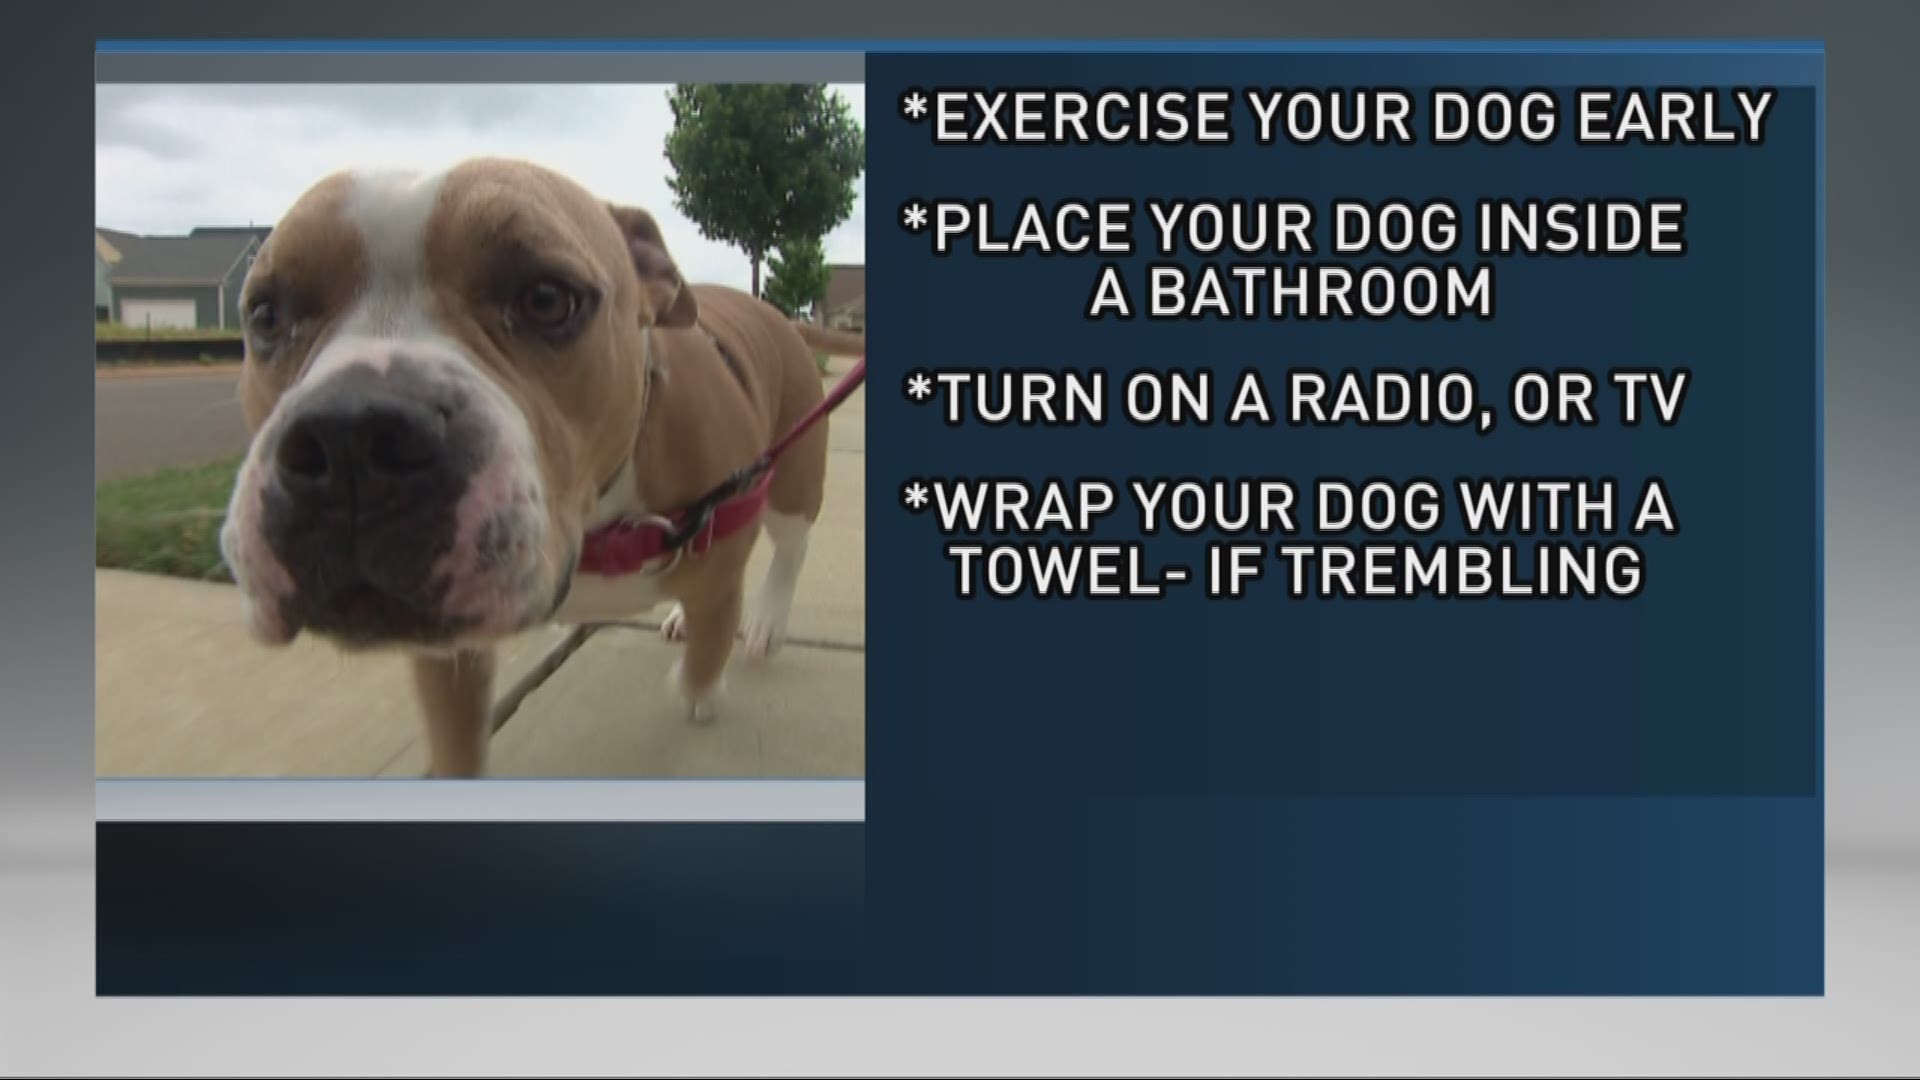 How to help you pets deal with the sounds and lights of fireworks this holiday weekend.